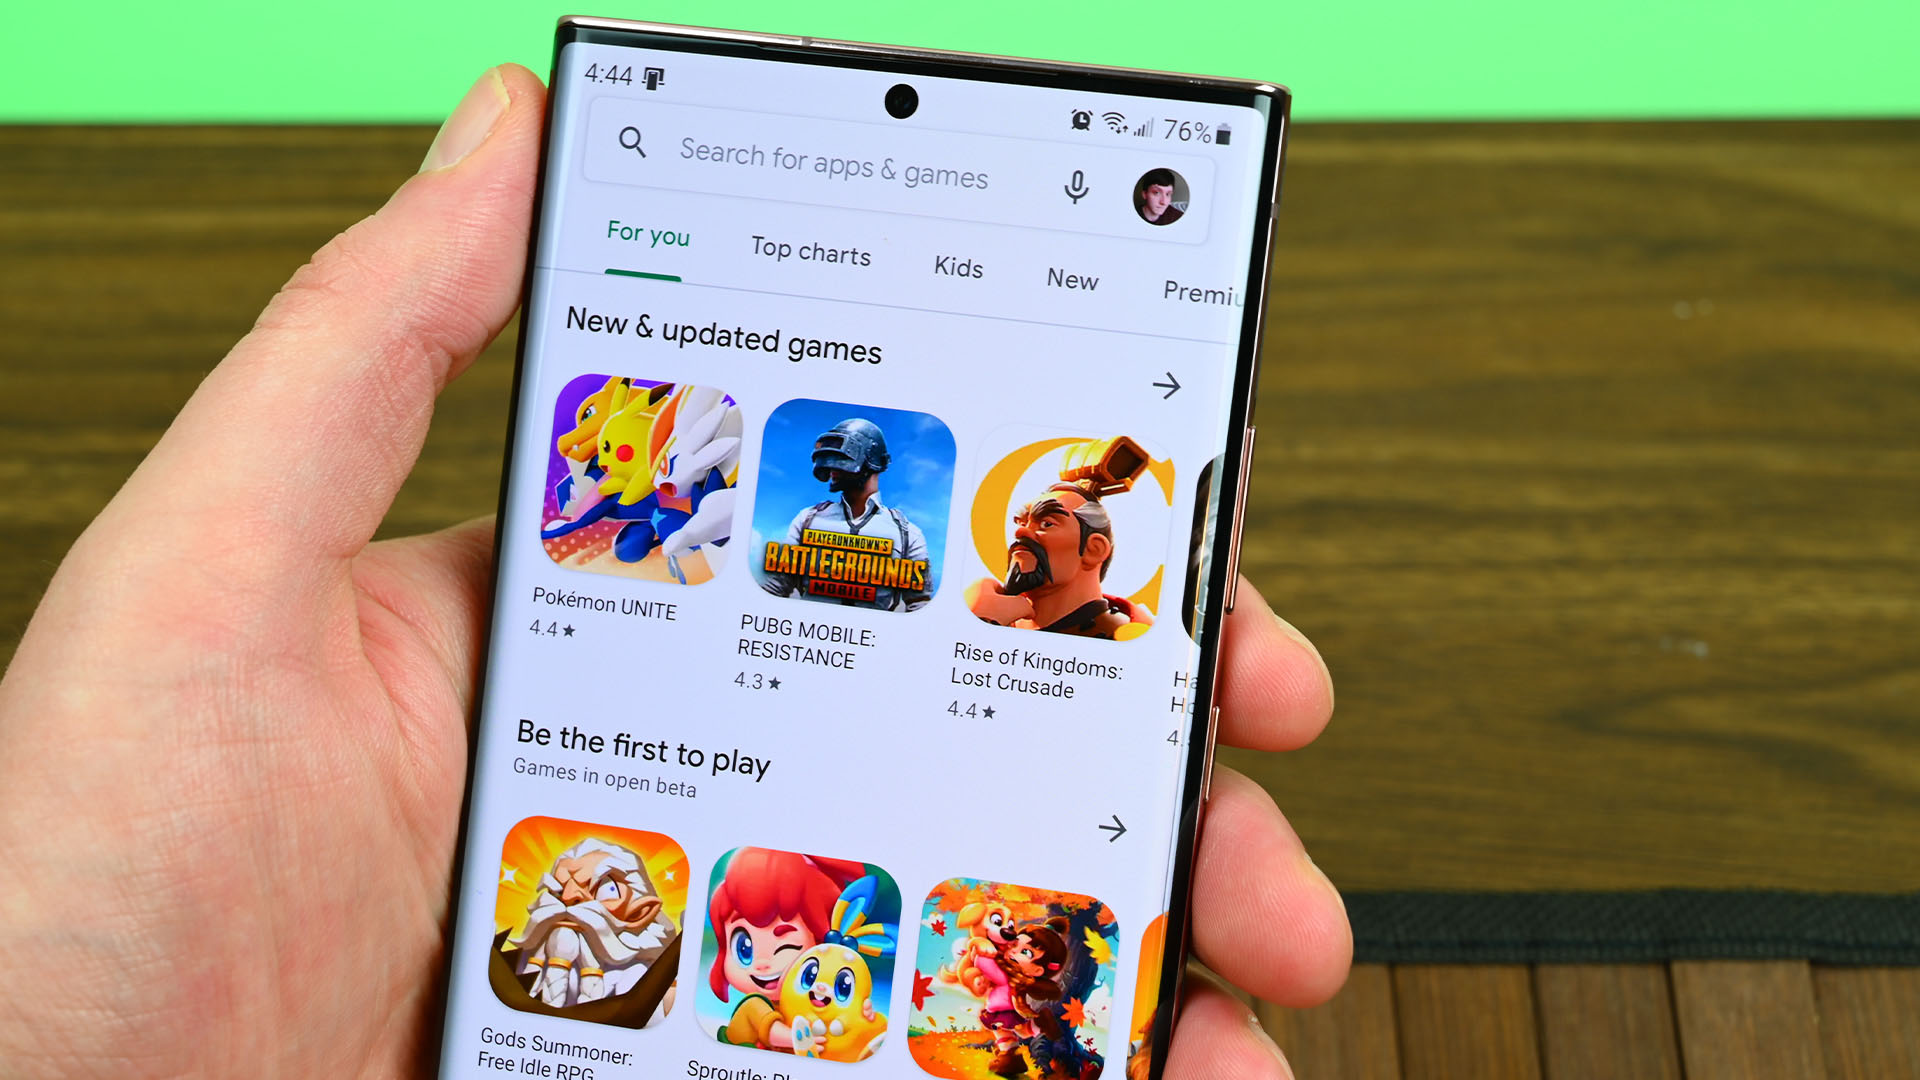 How to change country in Google Play store - Android Authority